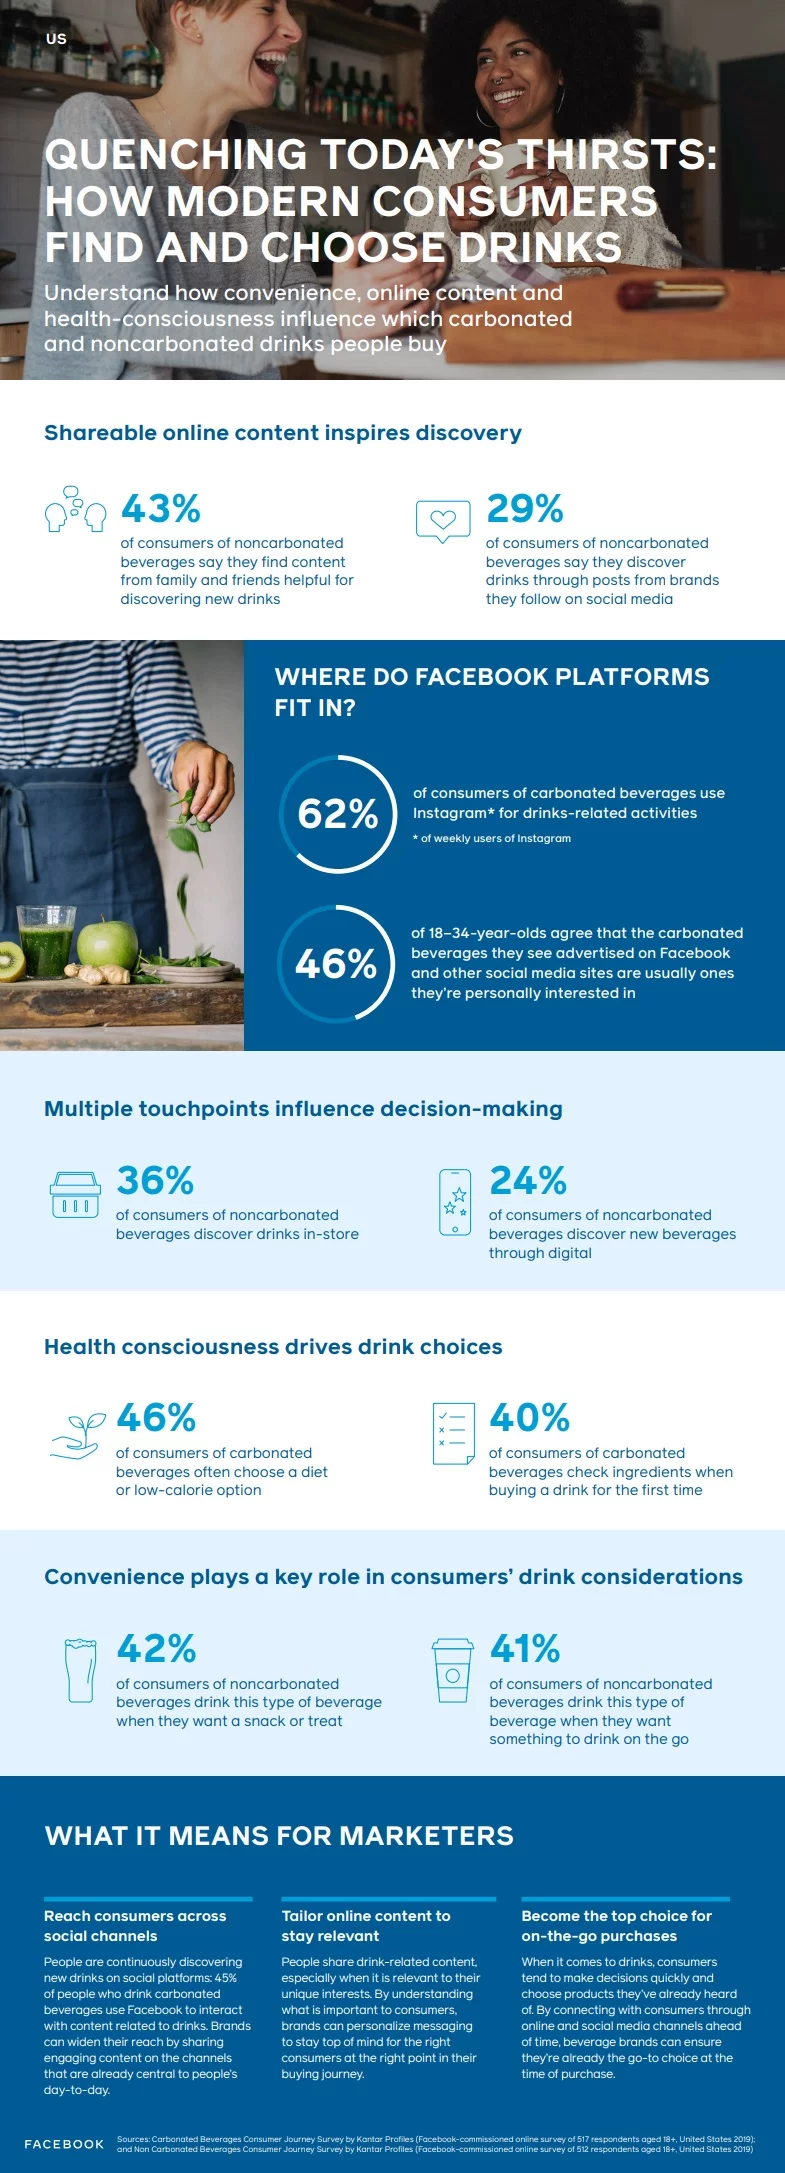 Infographic about how modern consumers find and choose drinks.